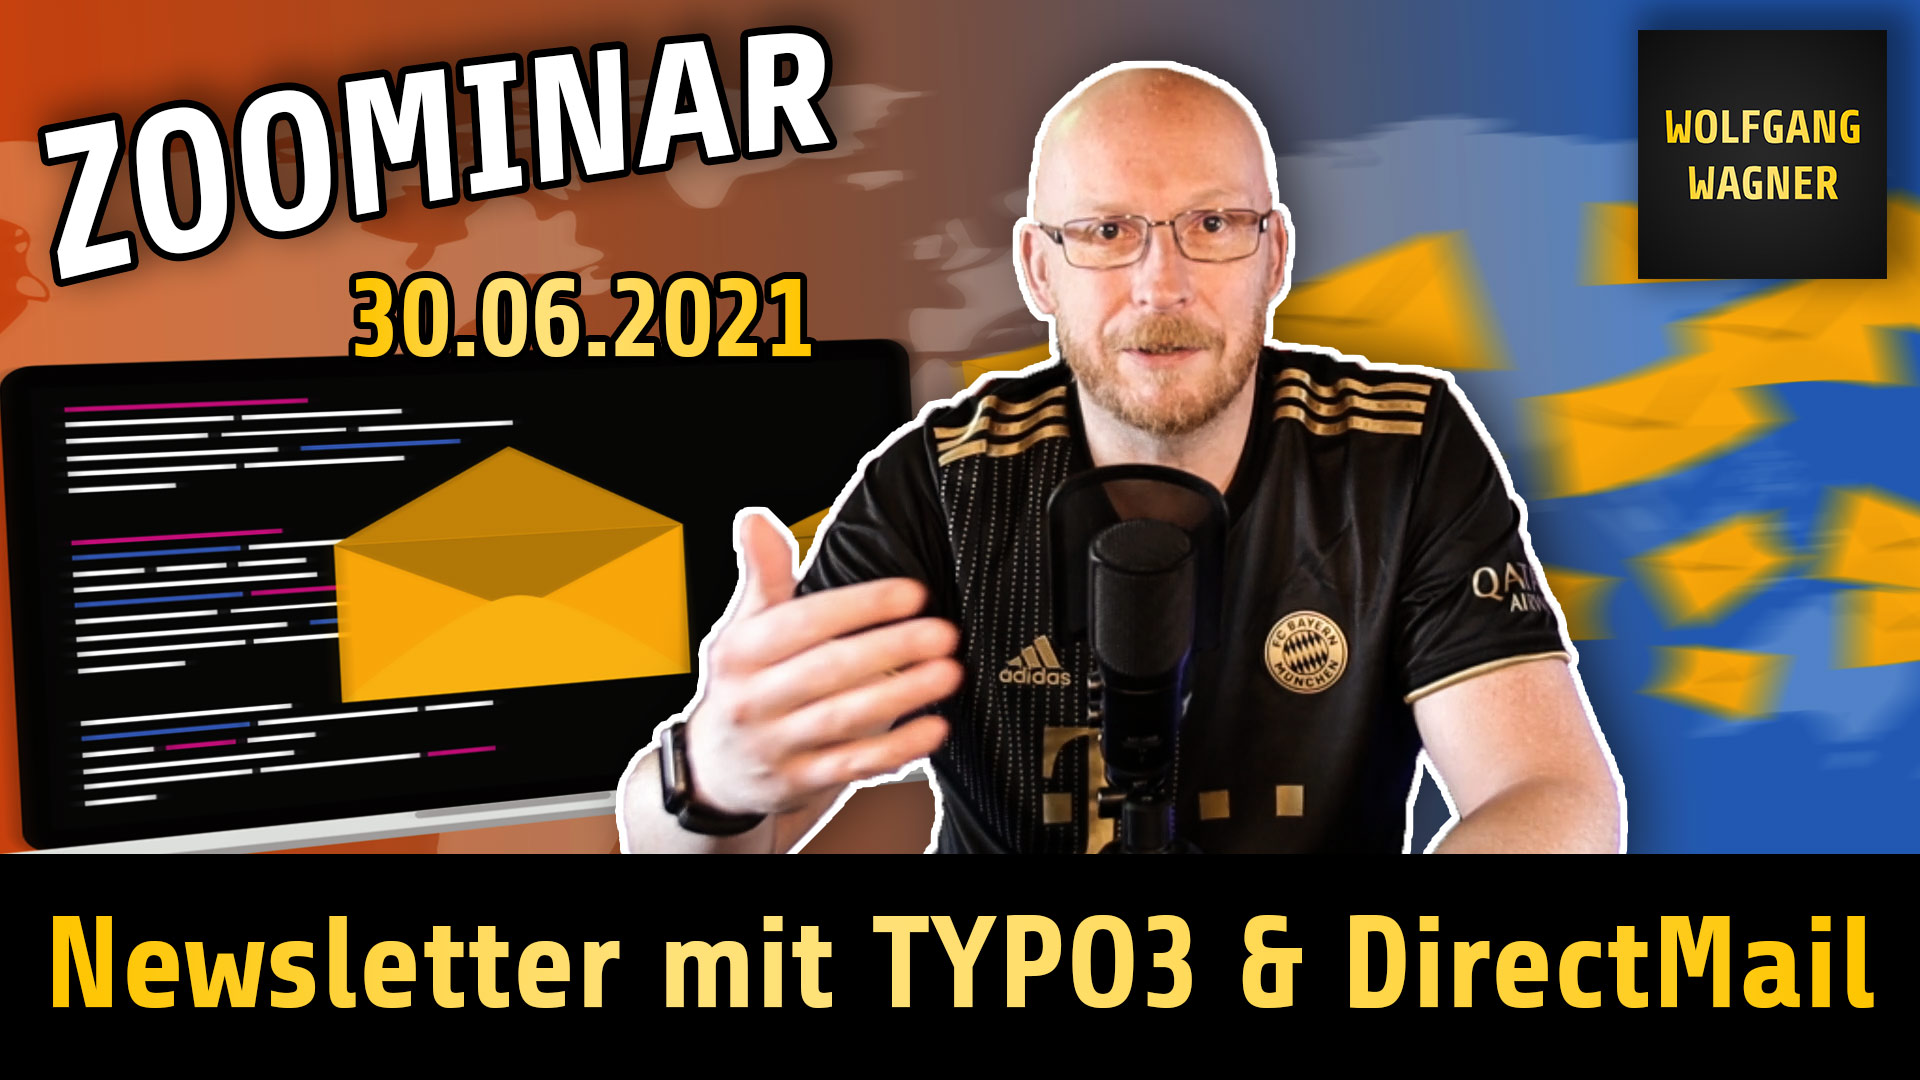 You are currently viewing Zoominar “Newsletter mit TYPO3 & DirectMail” am 30.06.2021